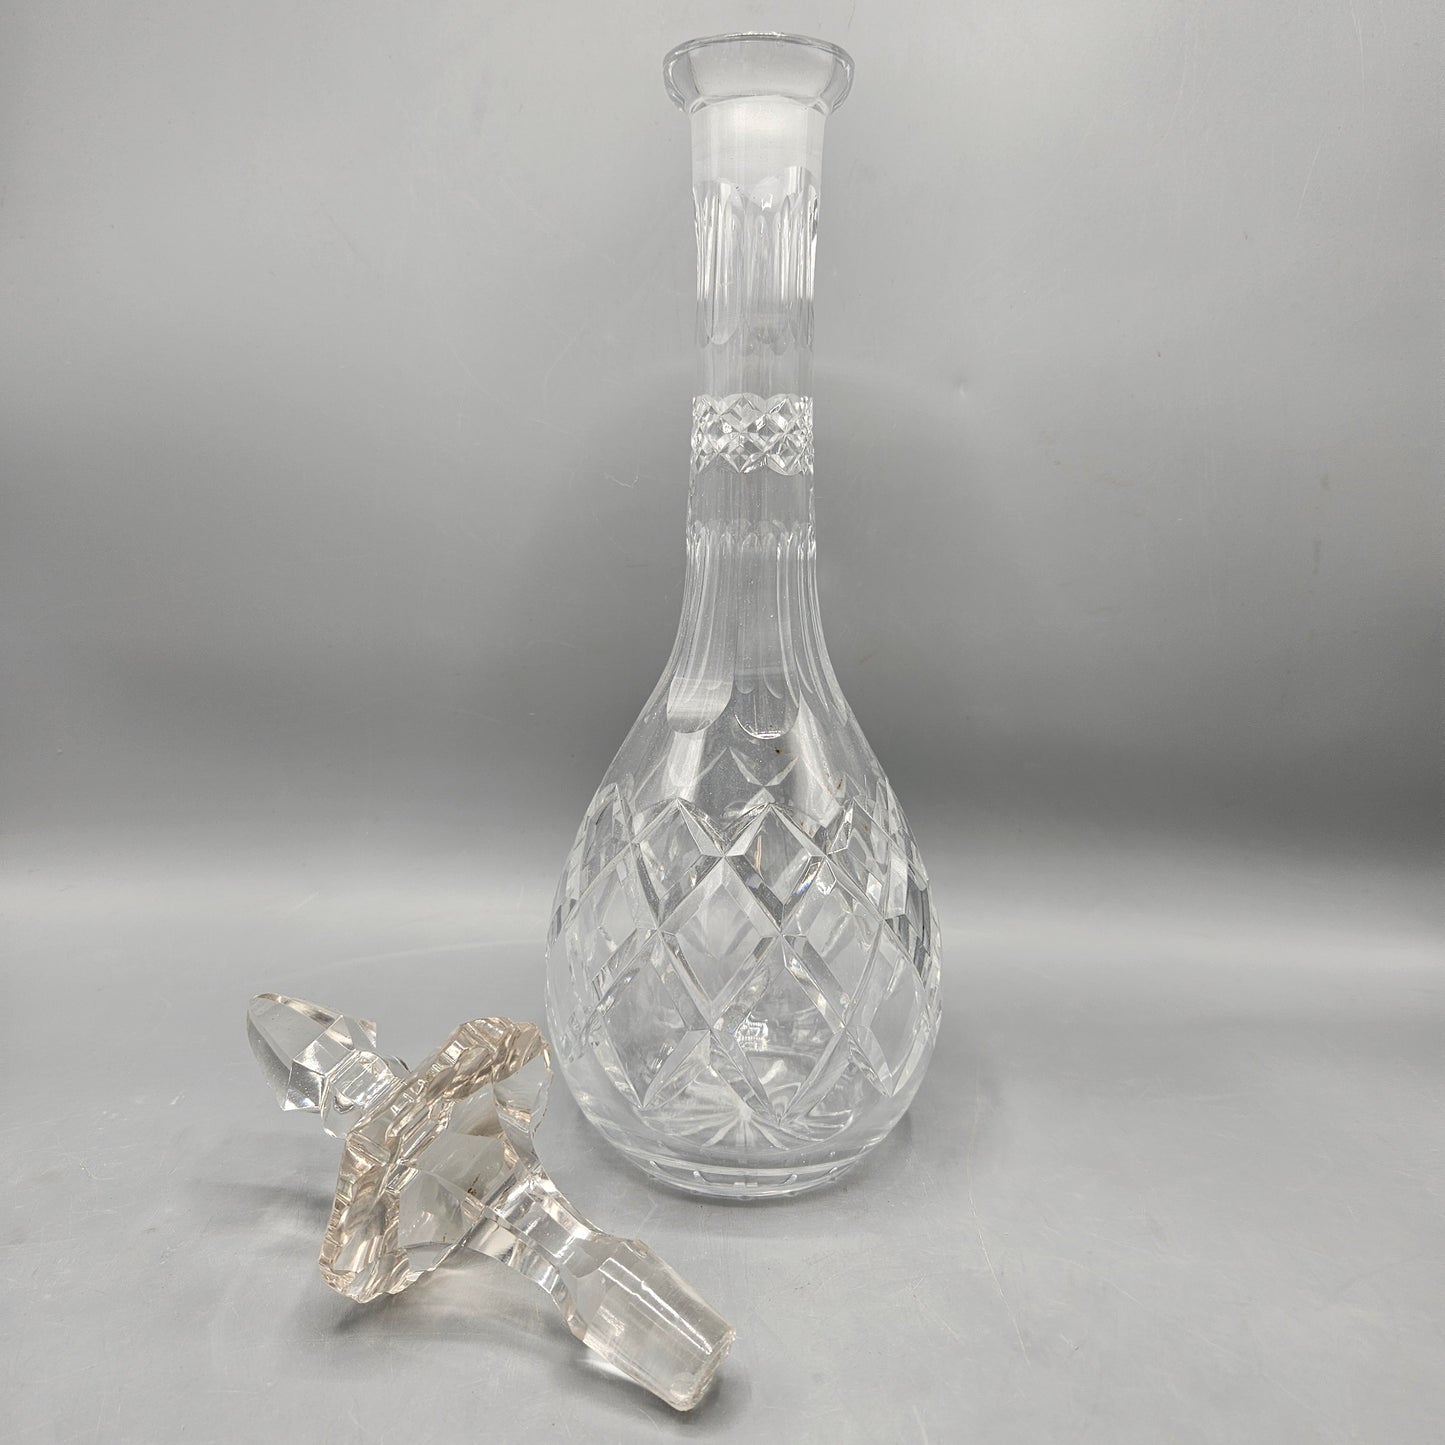 Vintage Crystal Glass Decanter with Stopper